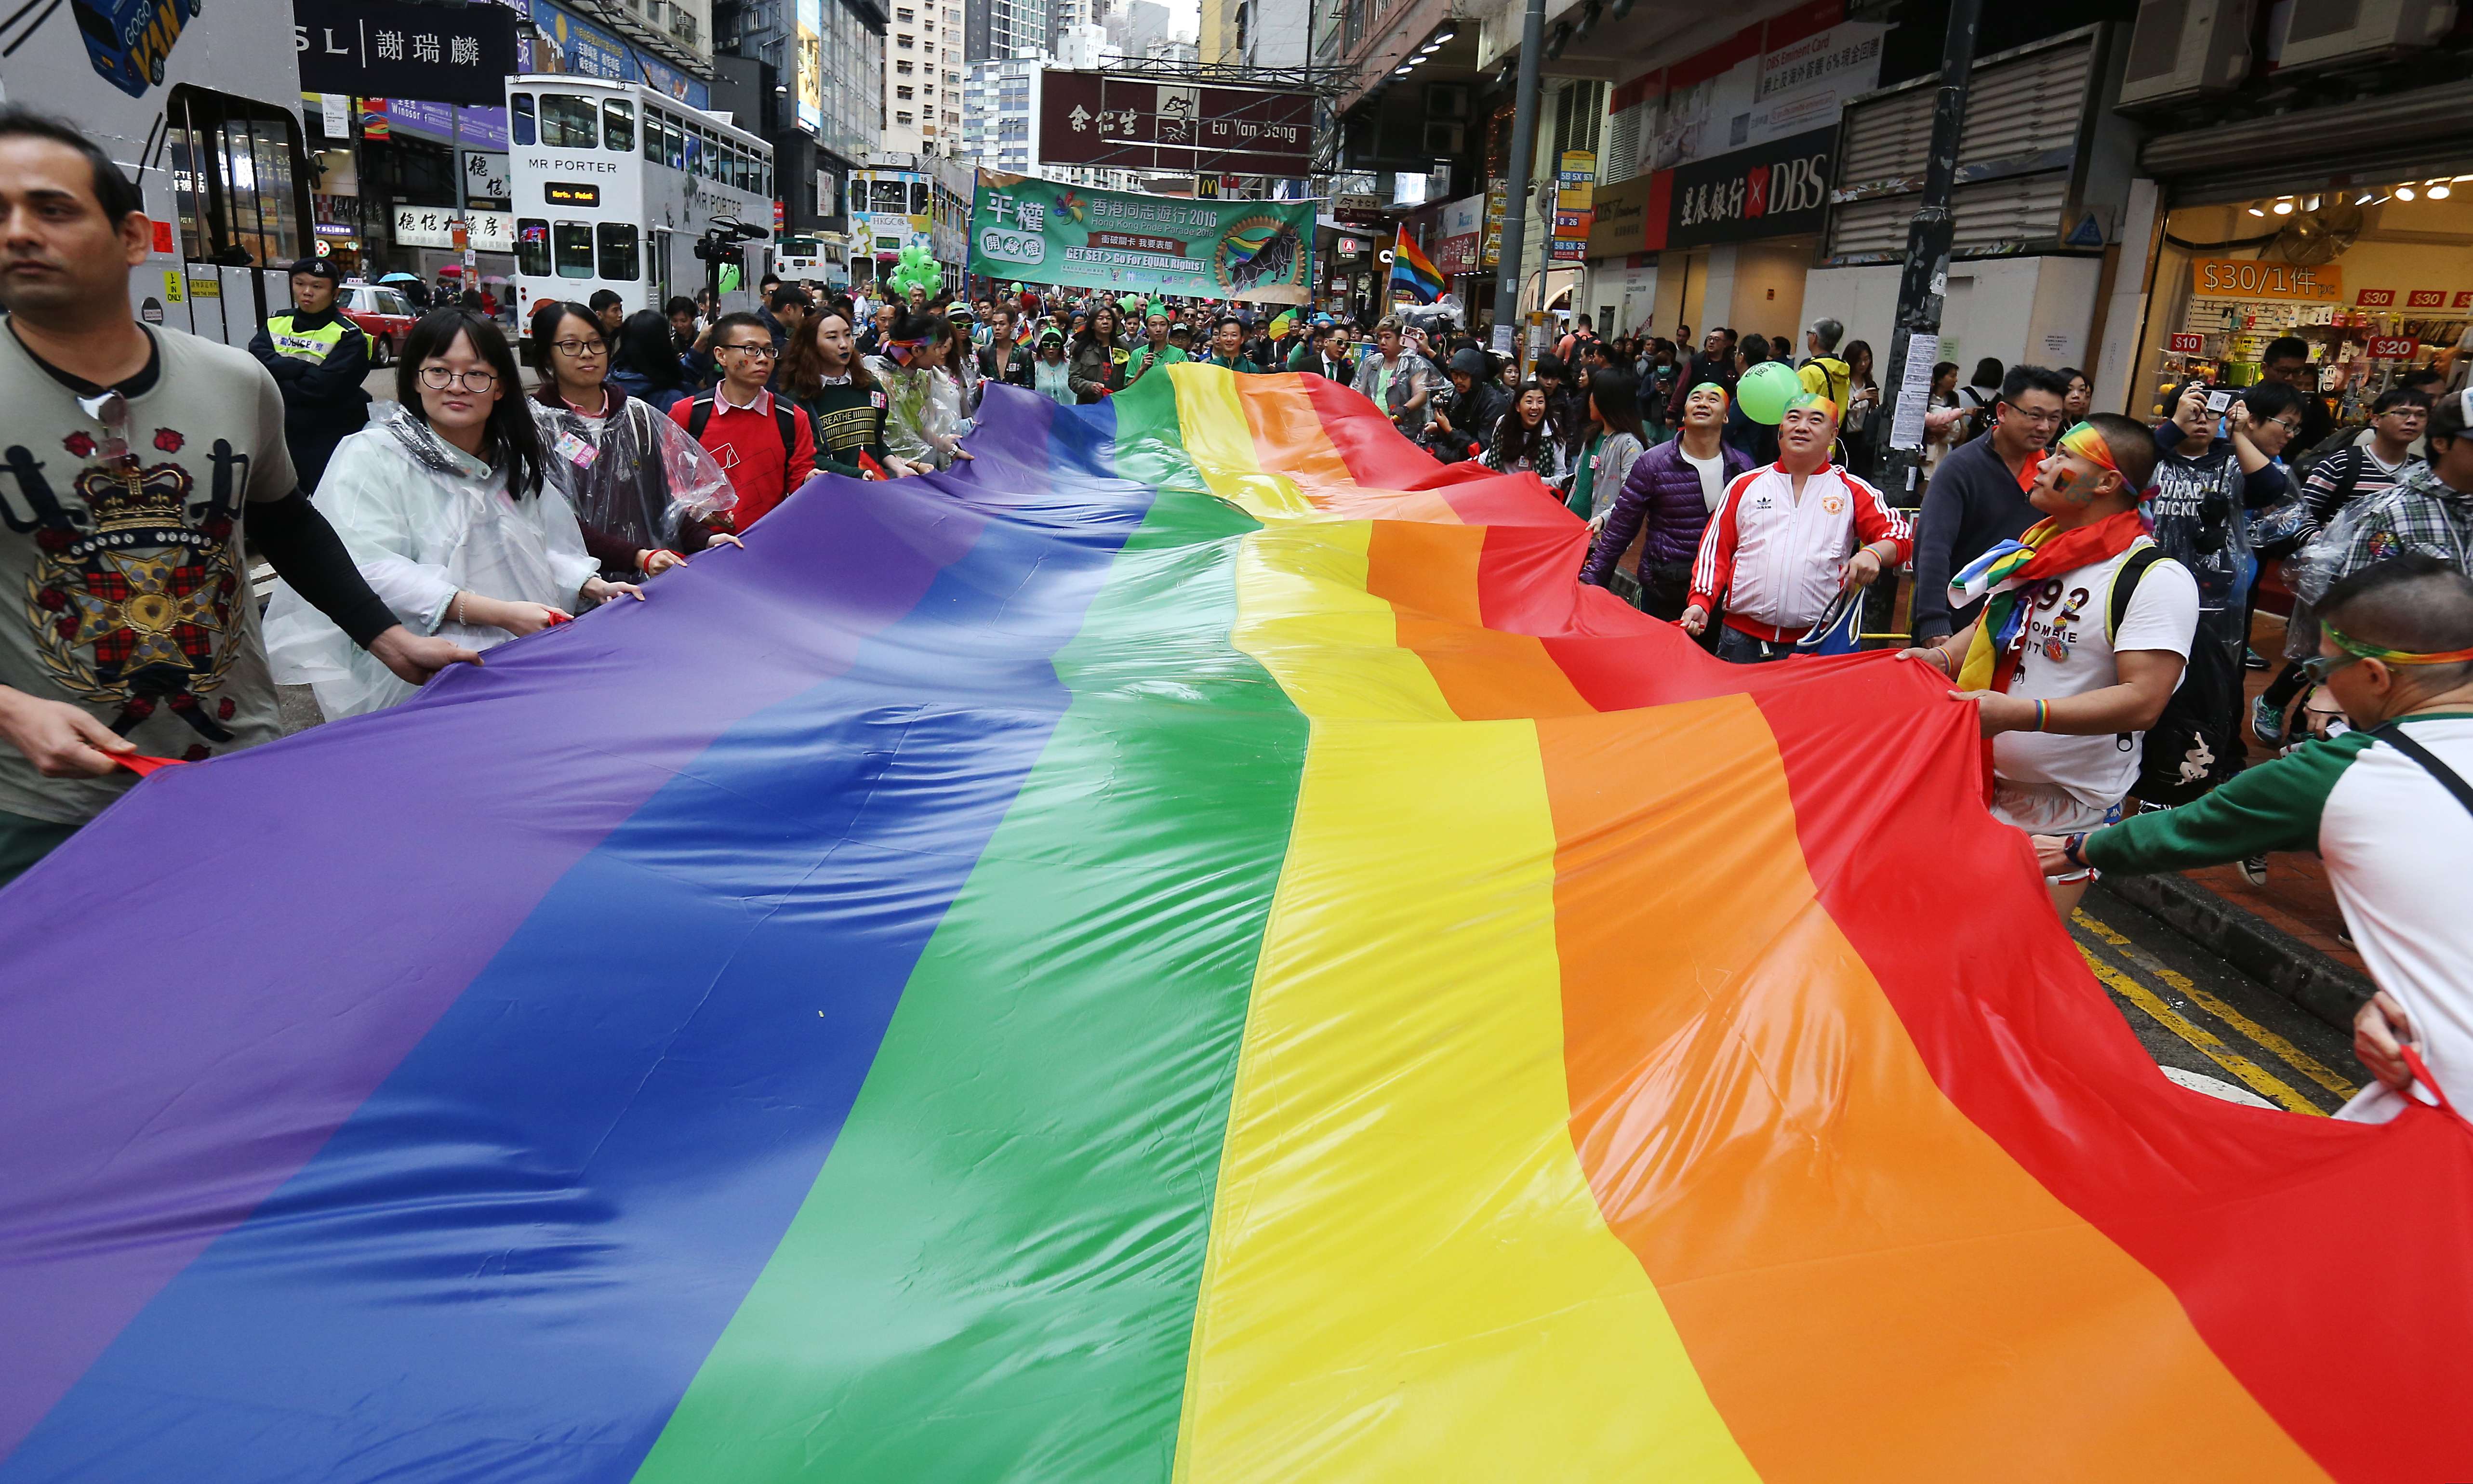 Has the time come for Hong Kong to legalise same-sex marriage? South China Morning Post